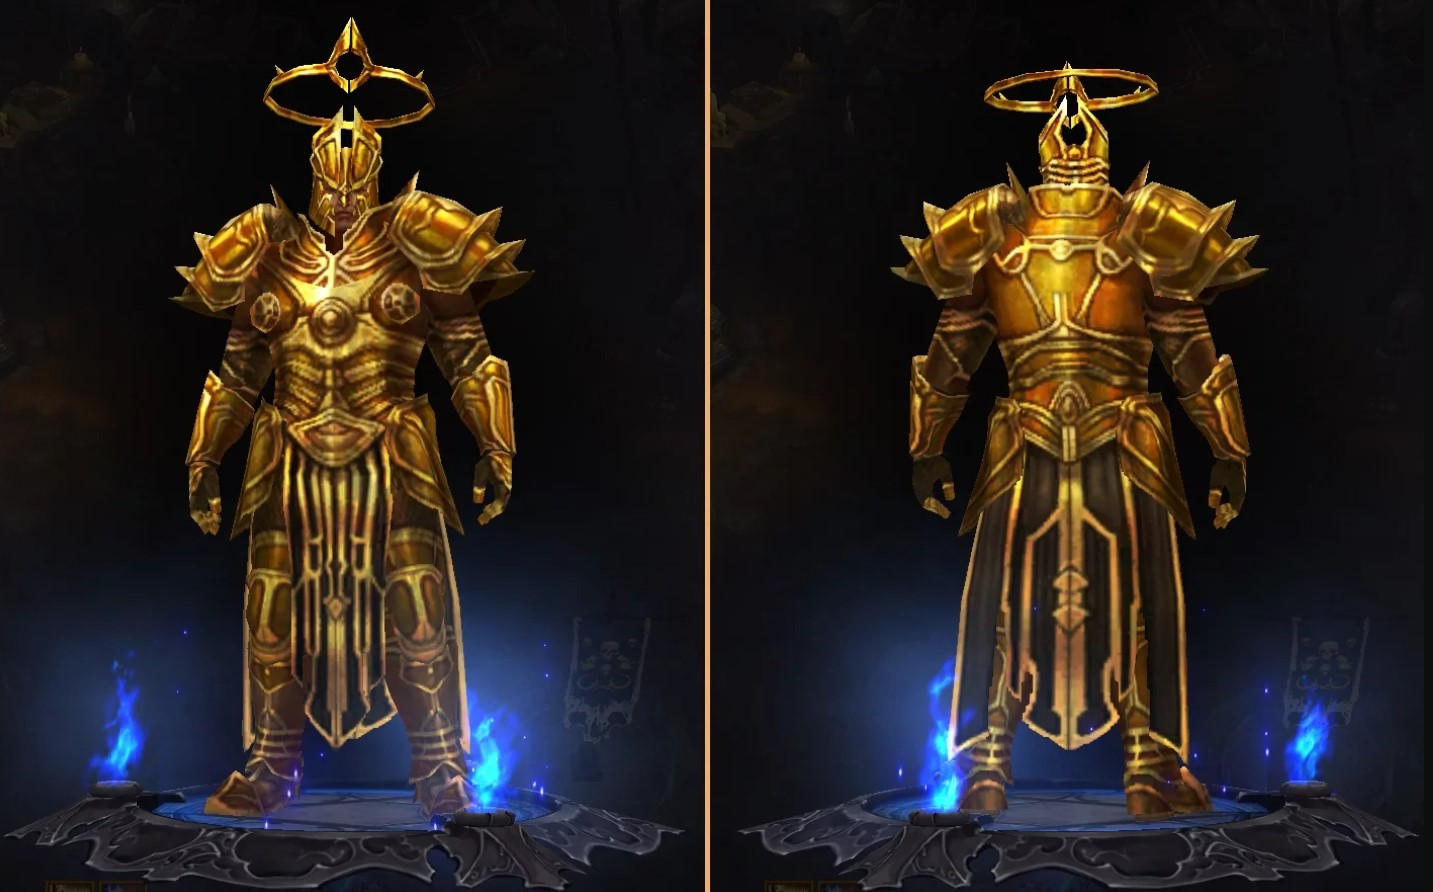 more oversized armor... and pauldrons, but from Diablo this time.